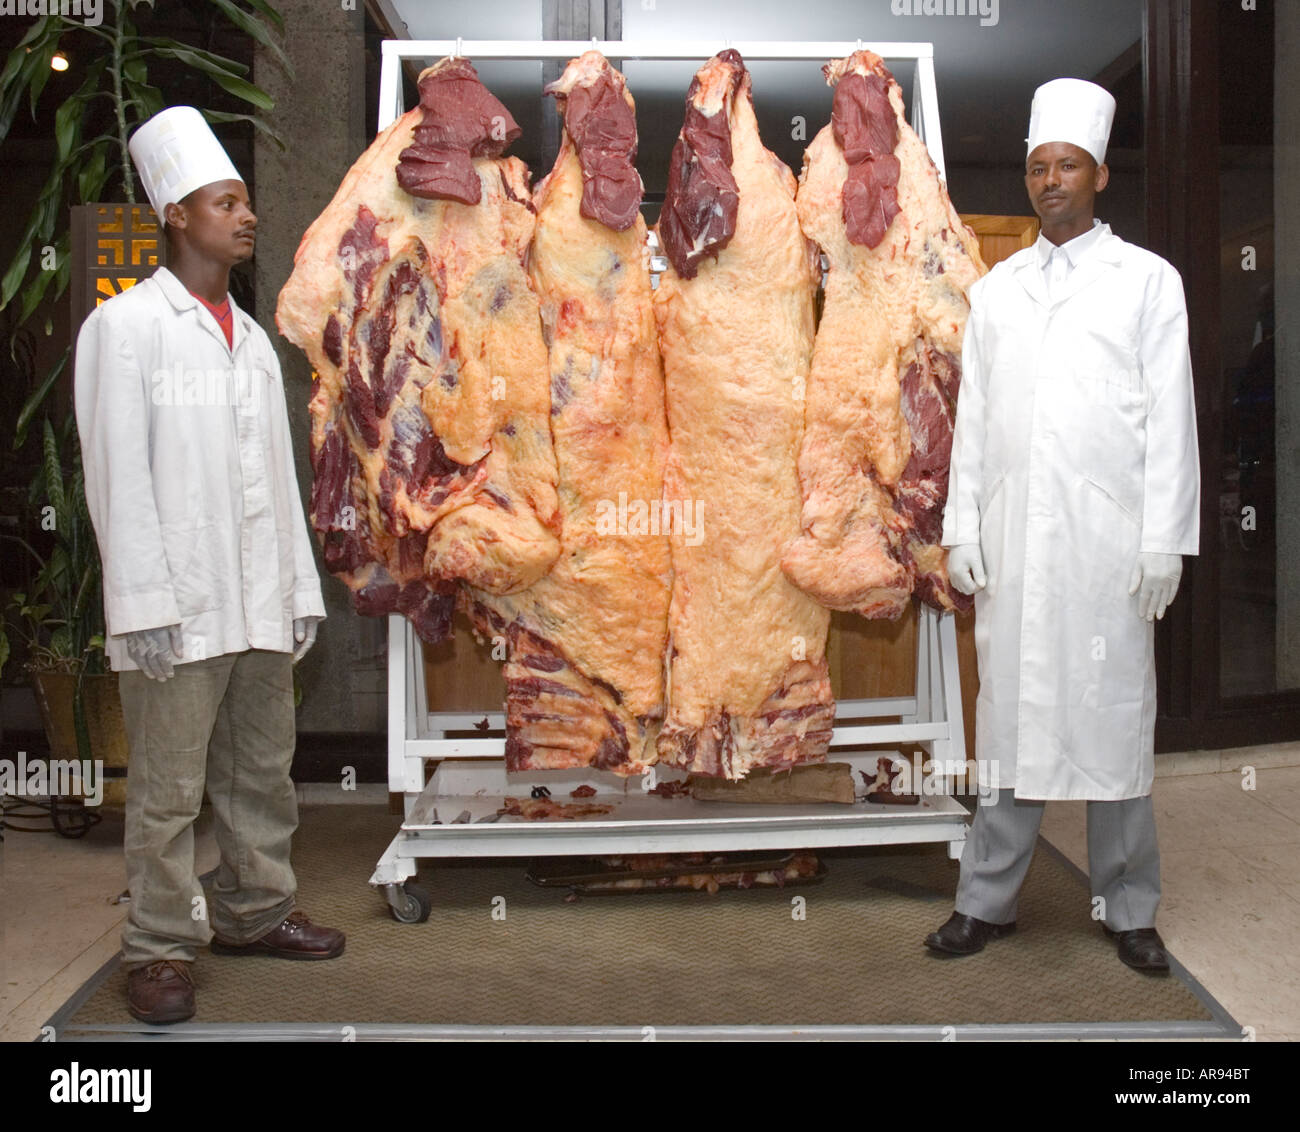 Ethiopian chefs at a wedding reception in Addis Abeba, Ethiopia with sides of raw beef hanging on a rack Stock Photo